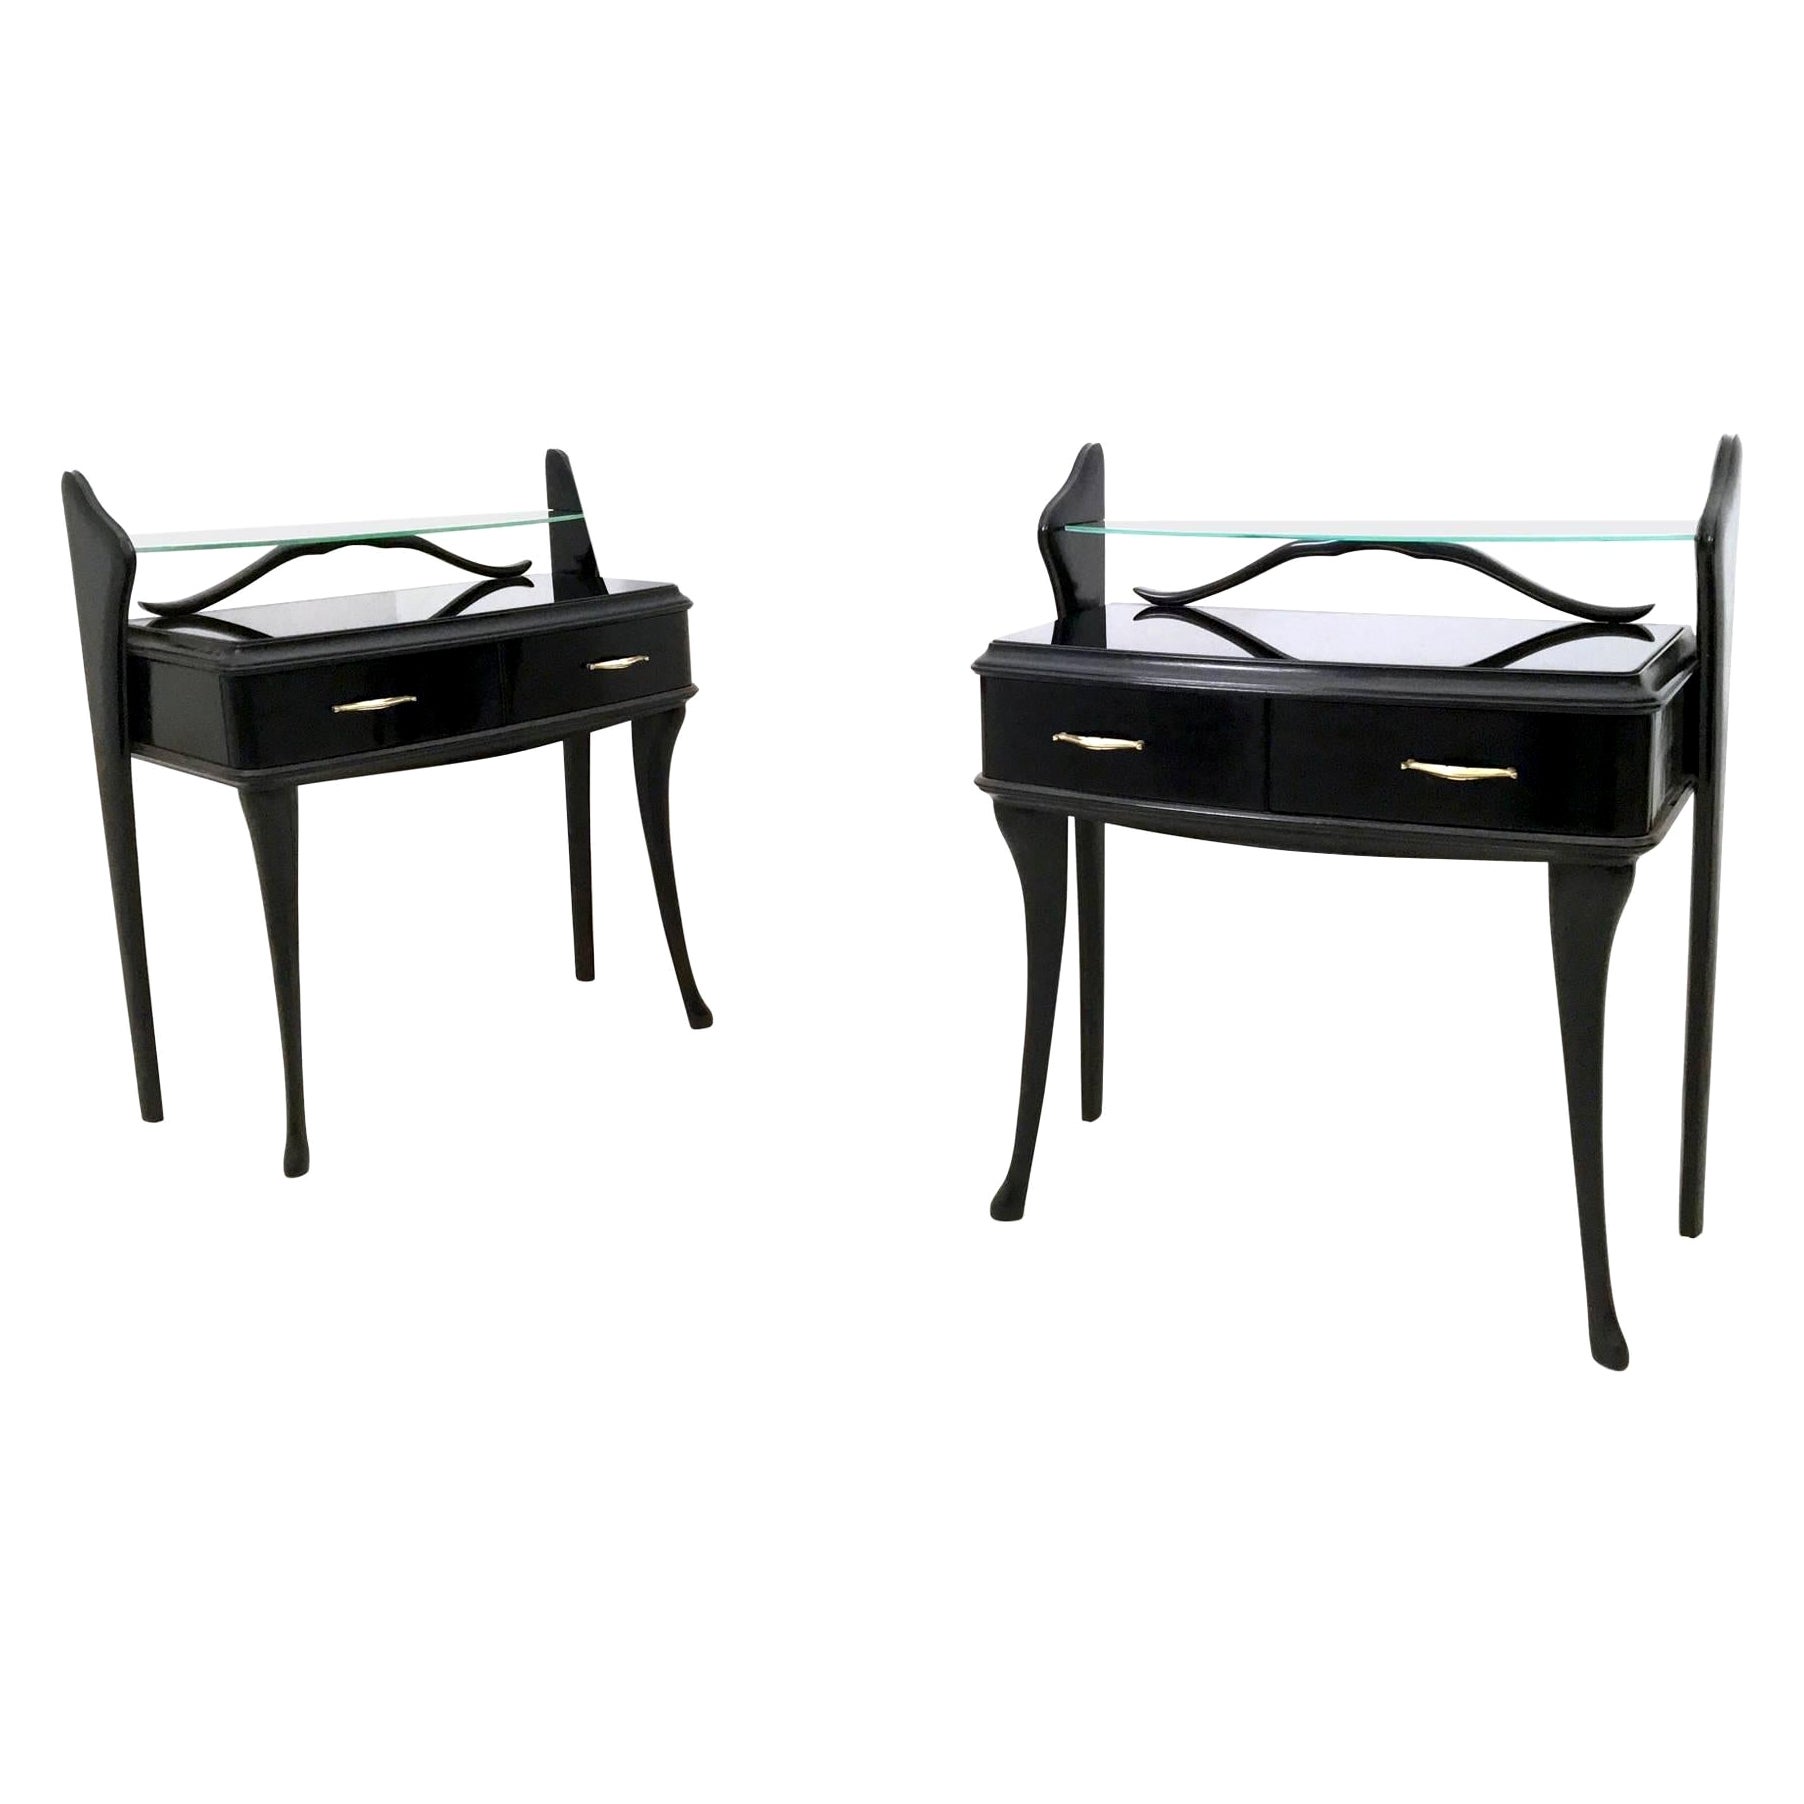 Pair of Vintage Black Lacquered Wood Nightstands with Glass Tops, Italy